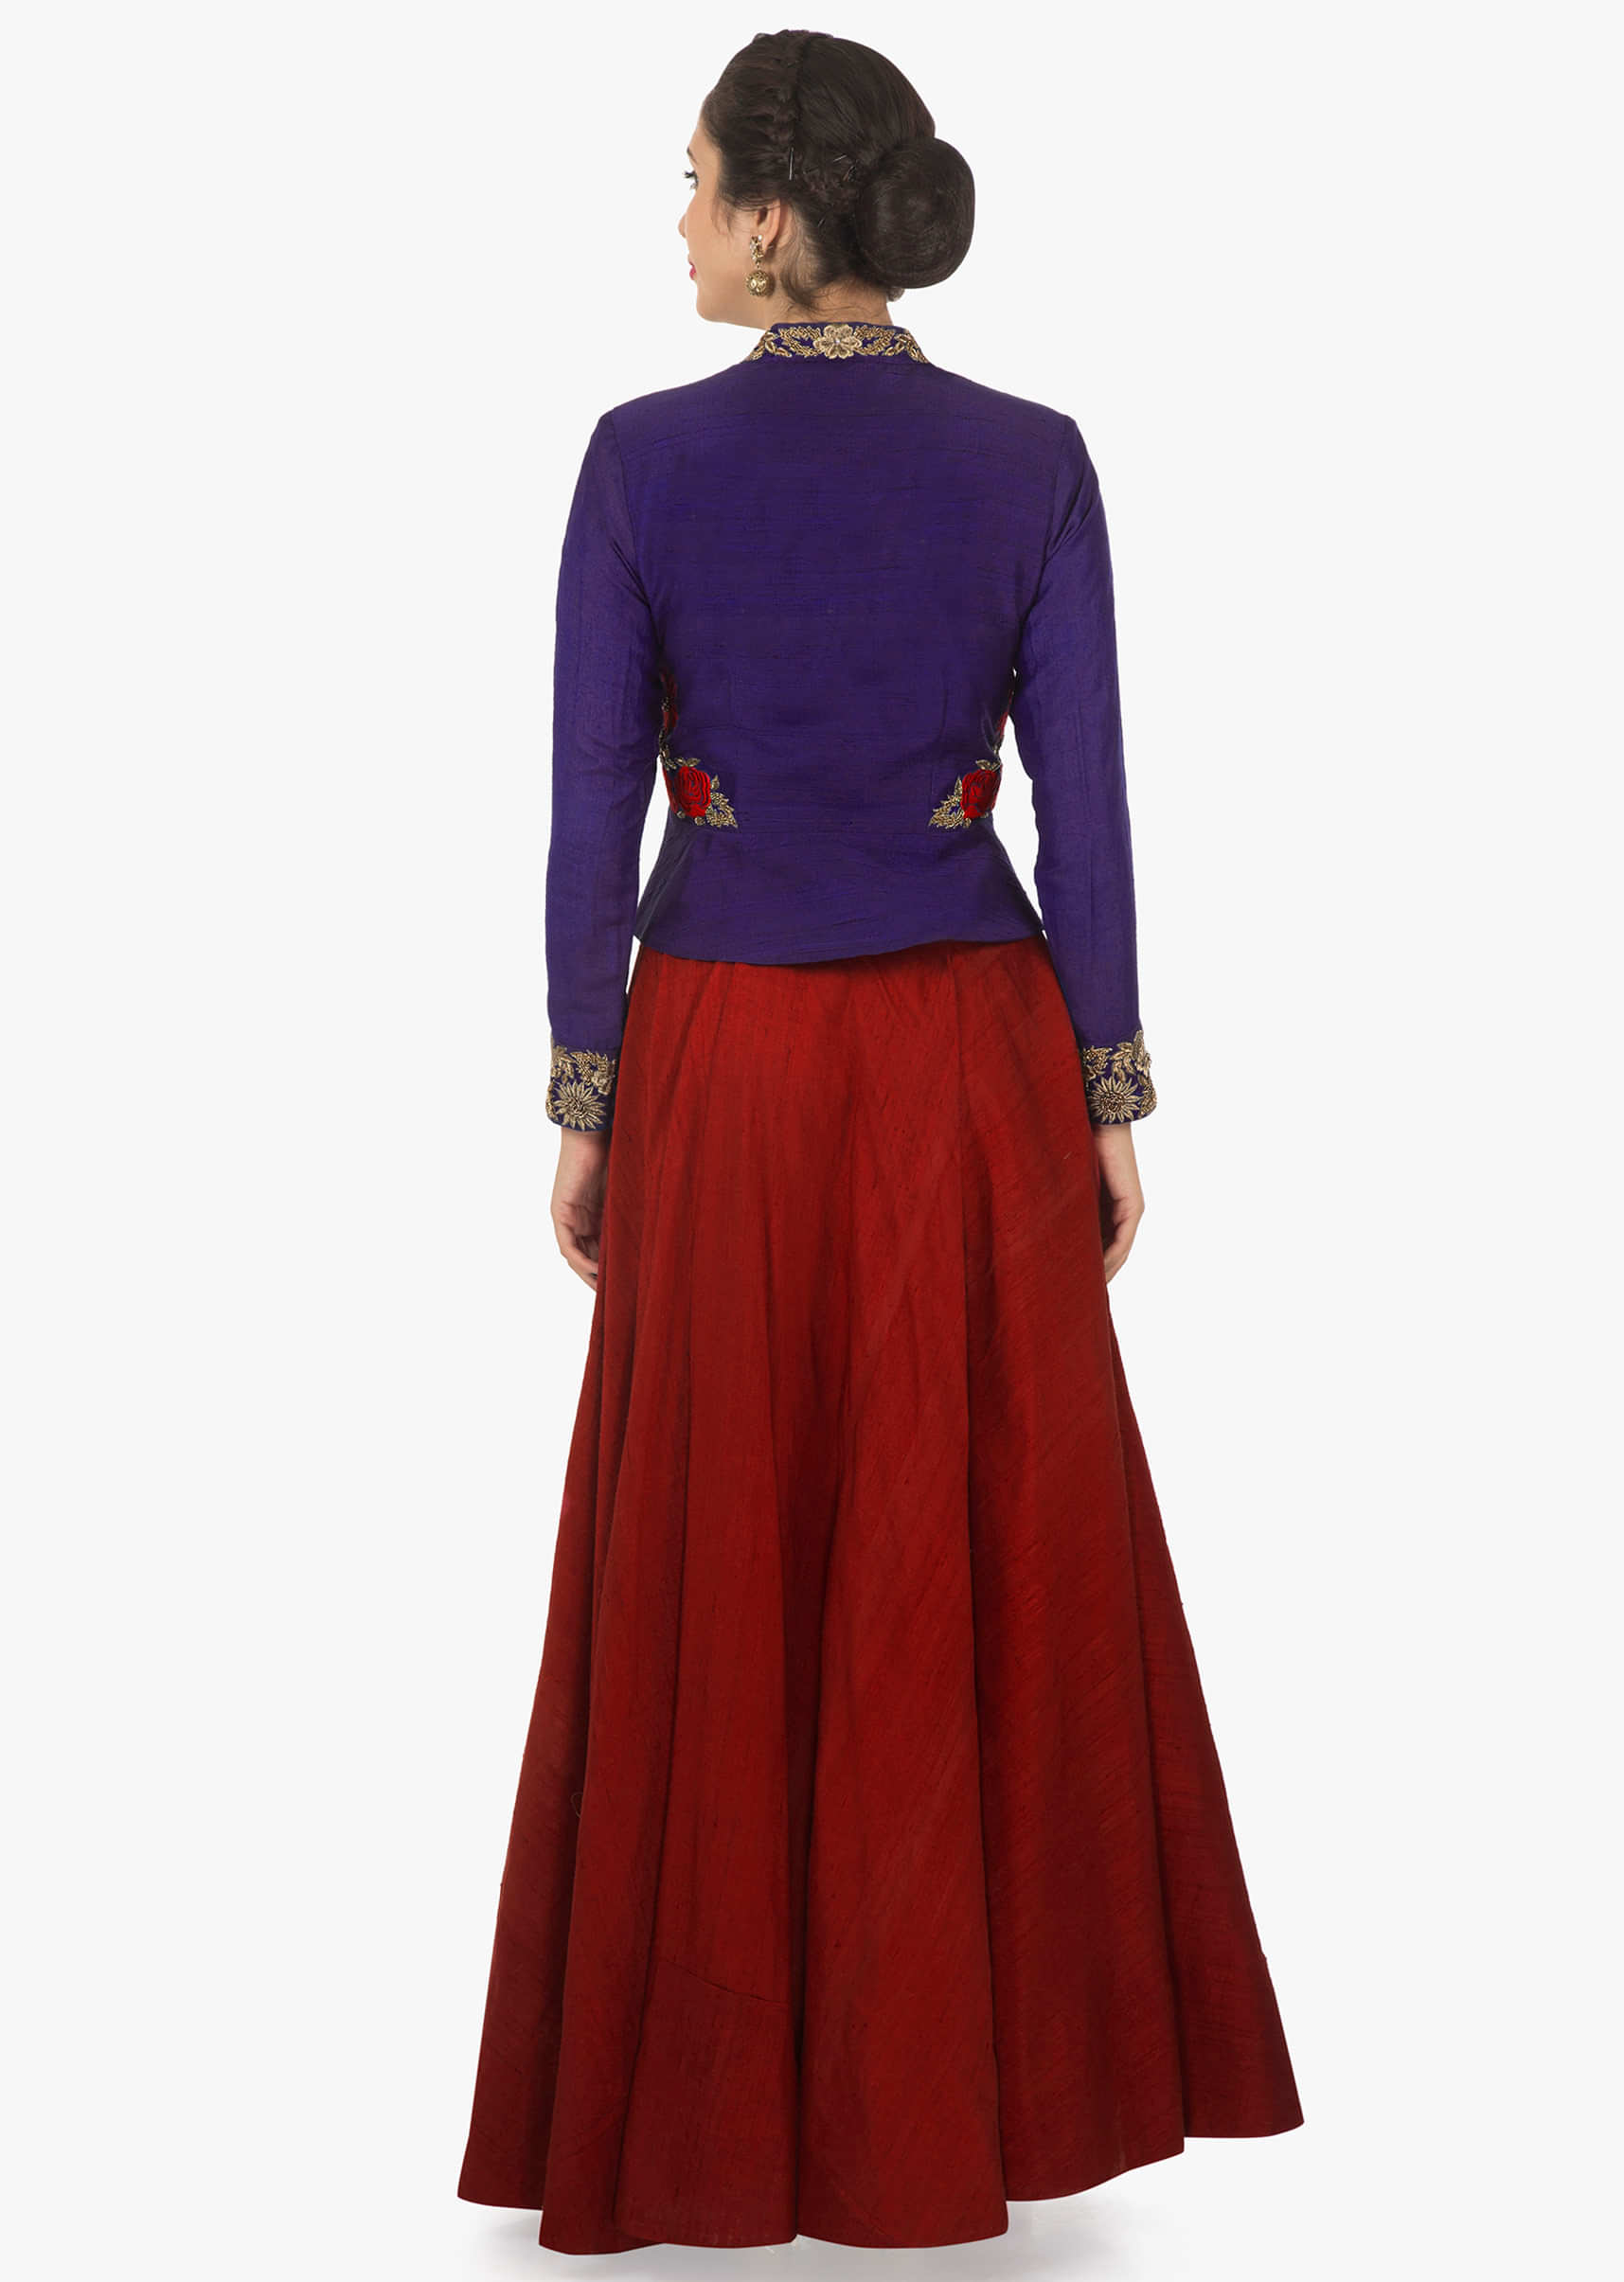 Red Skirt In Raw Silk And Persian Blue Full Sleeves Jacket With Resham And Zardosi Work Online - Kalki Fashion